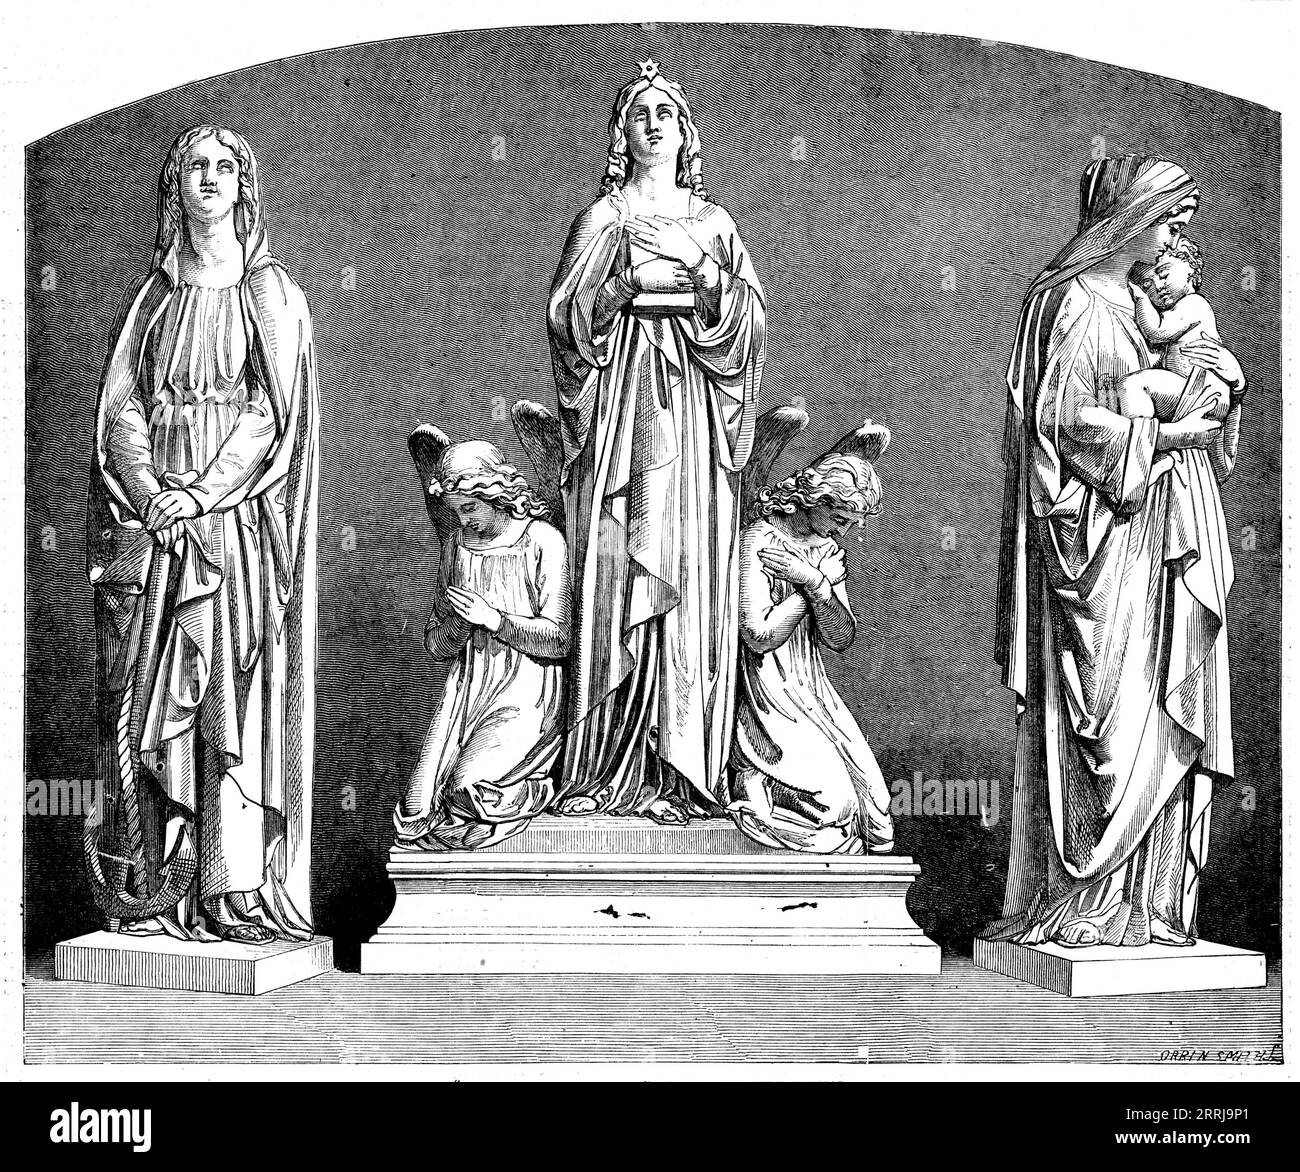 &quot;Faith, Hope and Charity&quot; - sculpted by J. Thomas, 1858. '...three fine works...[which] have been executed for a mausoleum now being erected in the Necropolis, Glasgow, for the family of John Houldsworth, Esq...We consider these sculptures to be amongst the best of Mr. Thomas's productions. The &quot;Hope&quot; is noble in character, firm, and dignified in attitude. The &quot;Charity&quot; is replete with kind and benevolent sentiment. In her arms a child is nestling, upon which her face beams with tender affection. The &quot;Faith&quot; is a finely-conceived figure; the face upturne Stock Photo